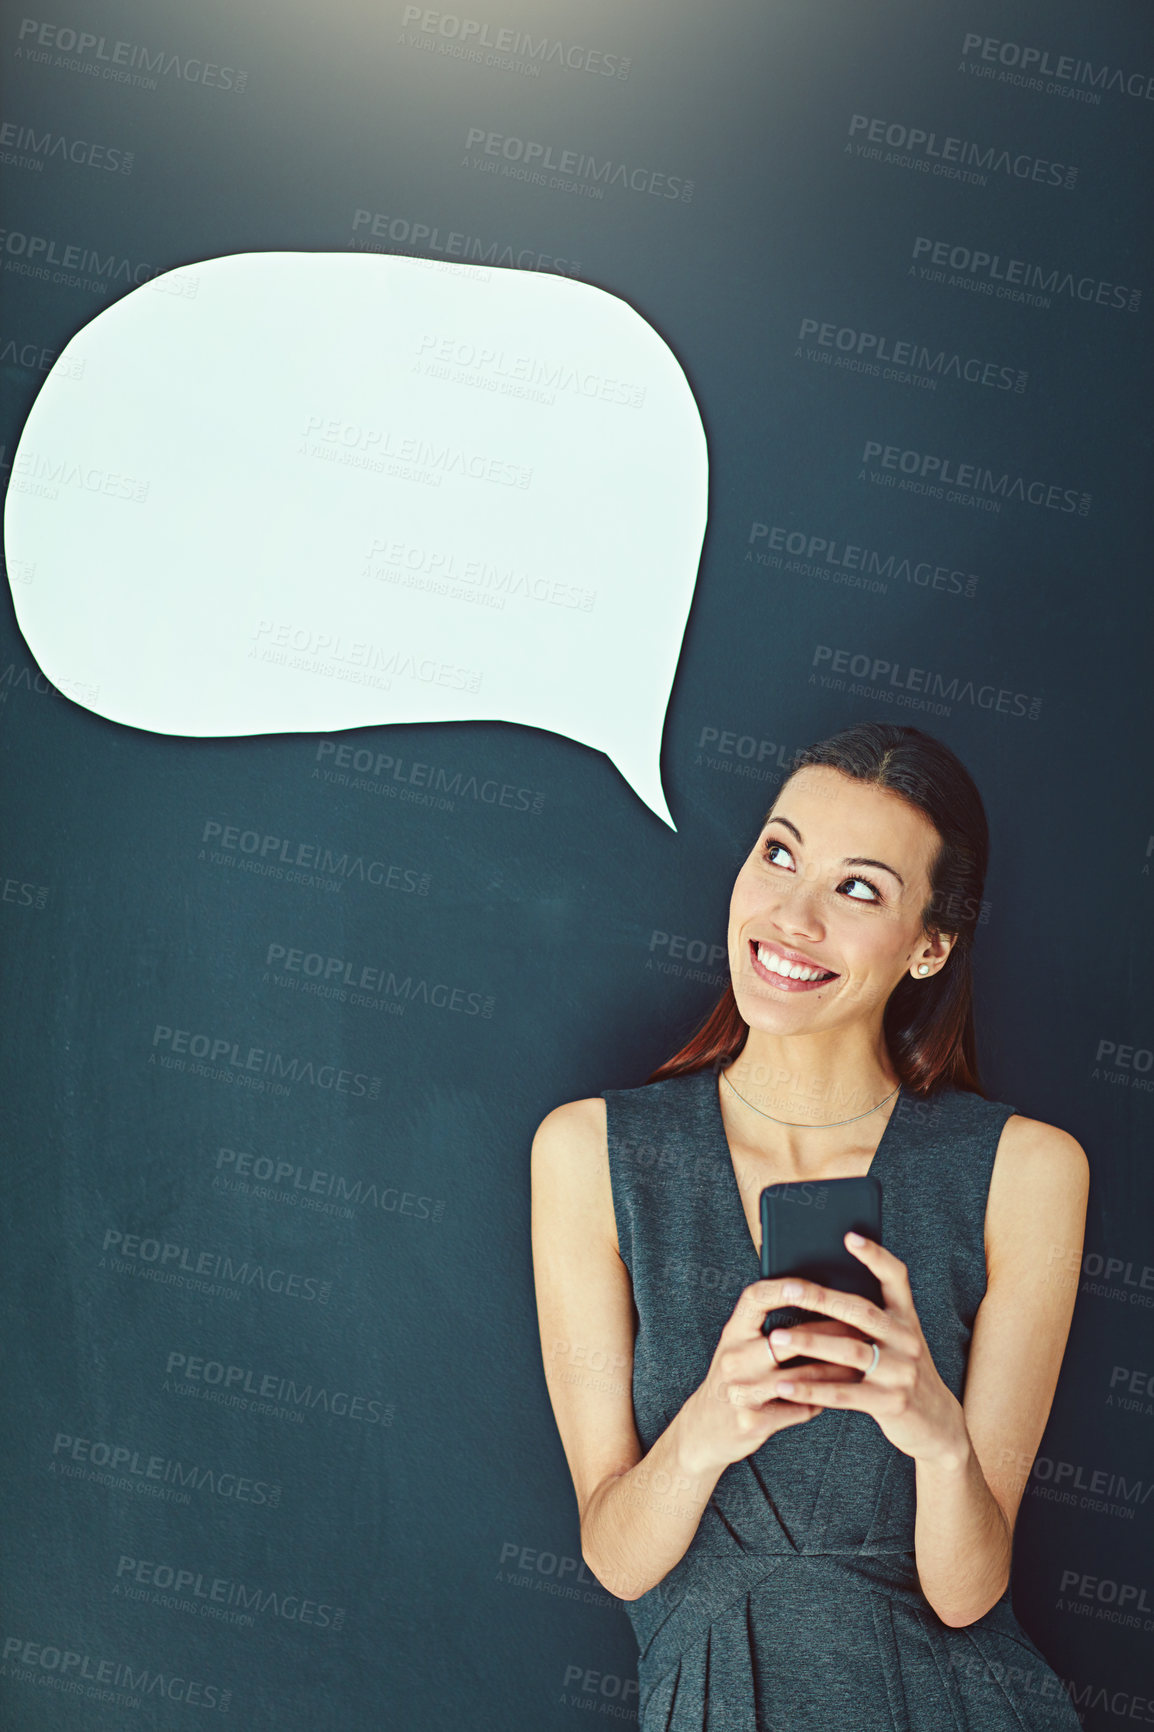 Buy stock photo Shot of a young woman sending a text message against a gray background